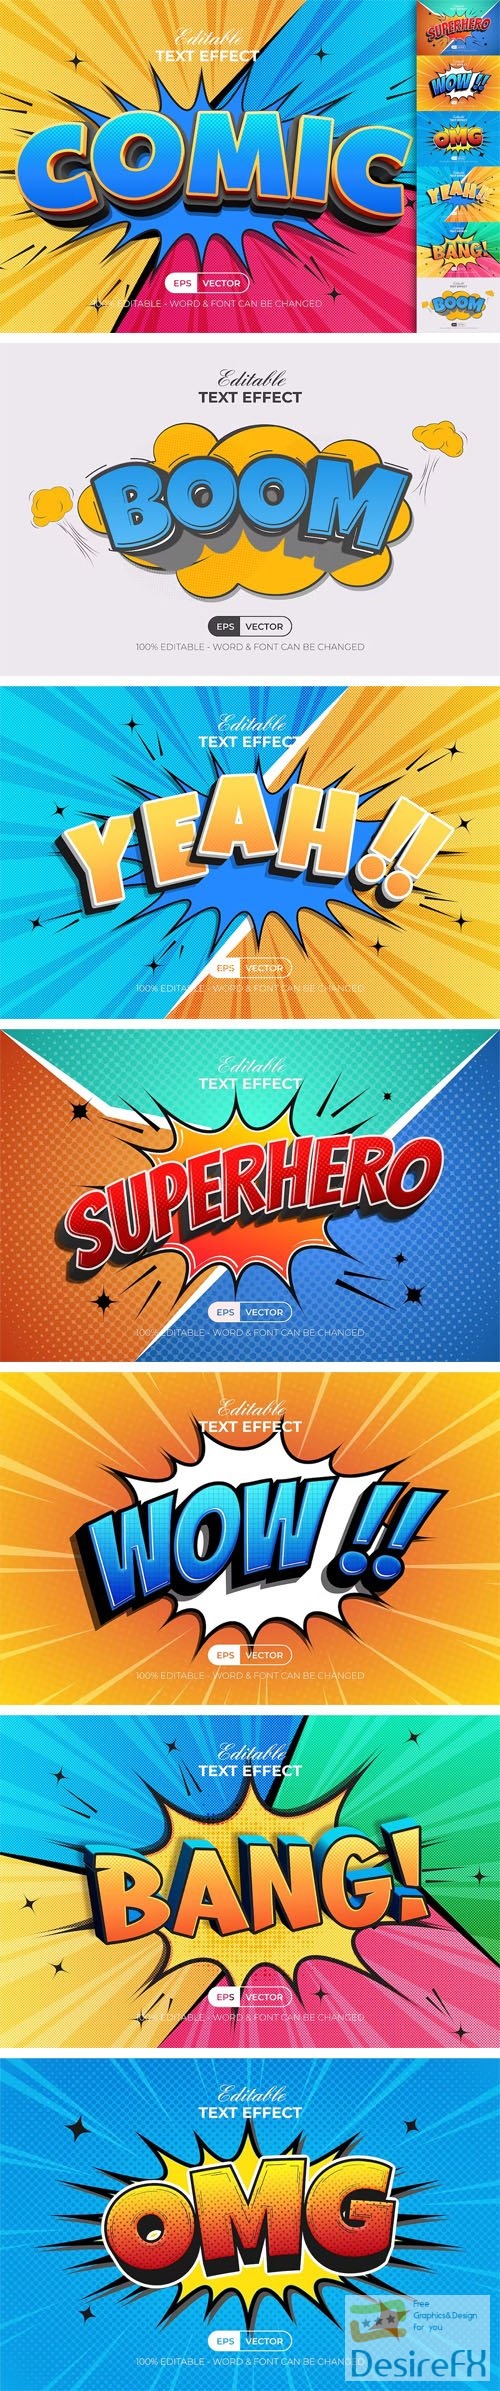 Comic Editable Text Effects for Illustrator